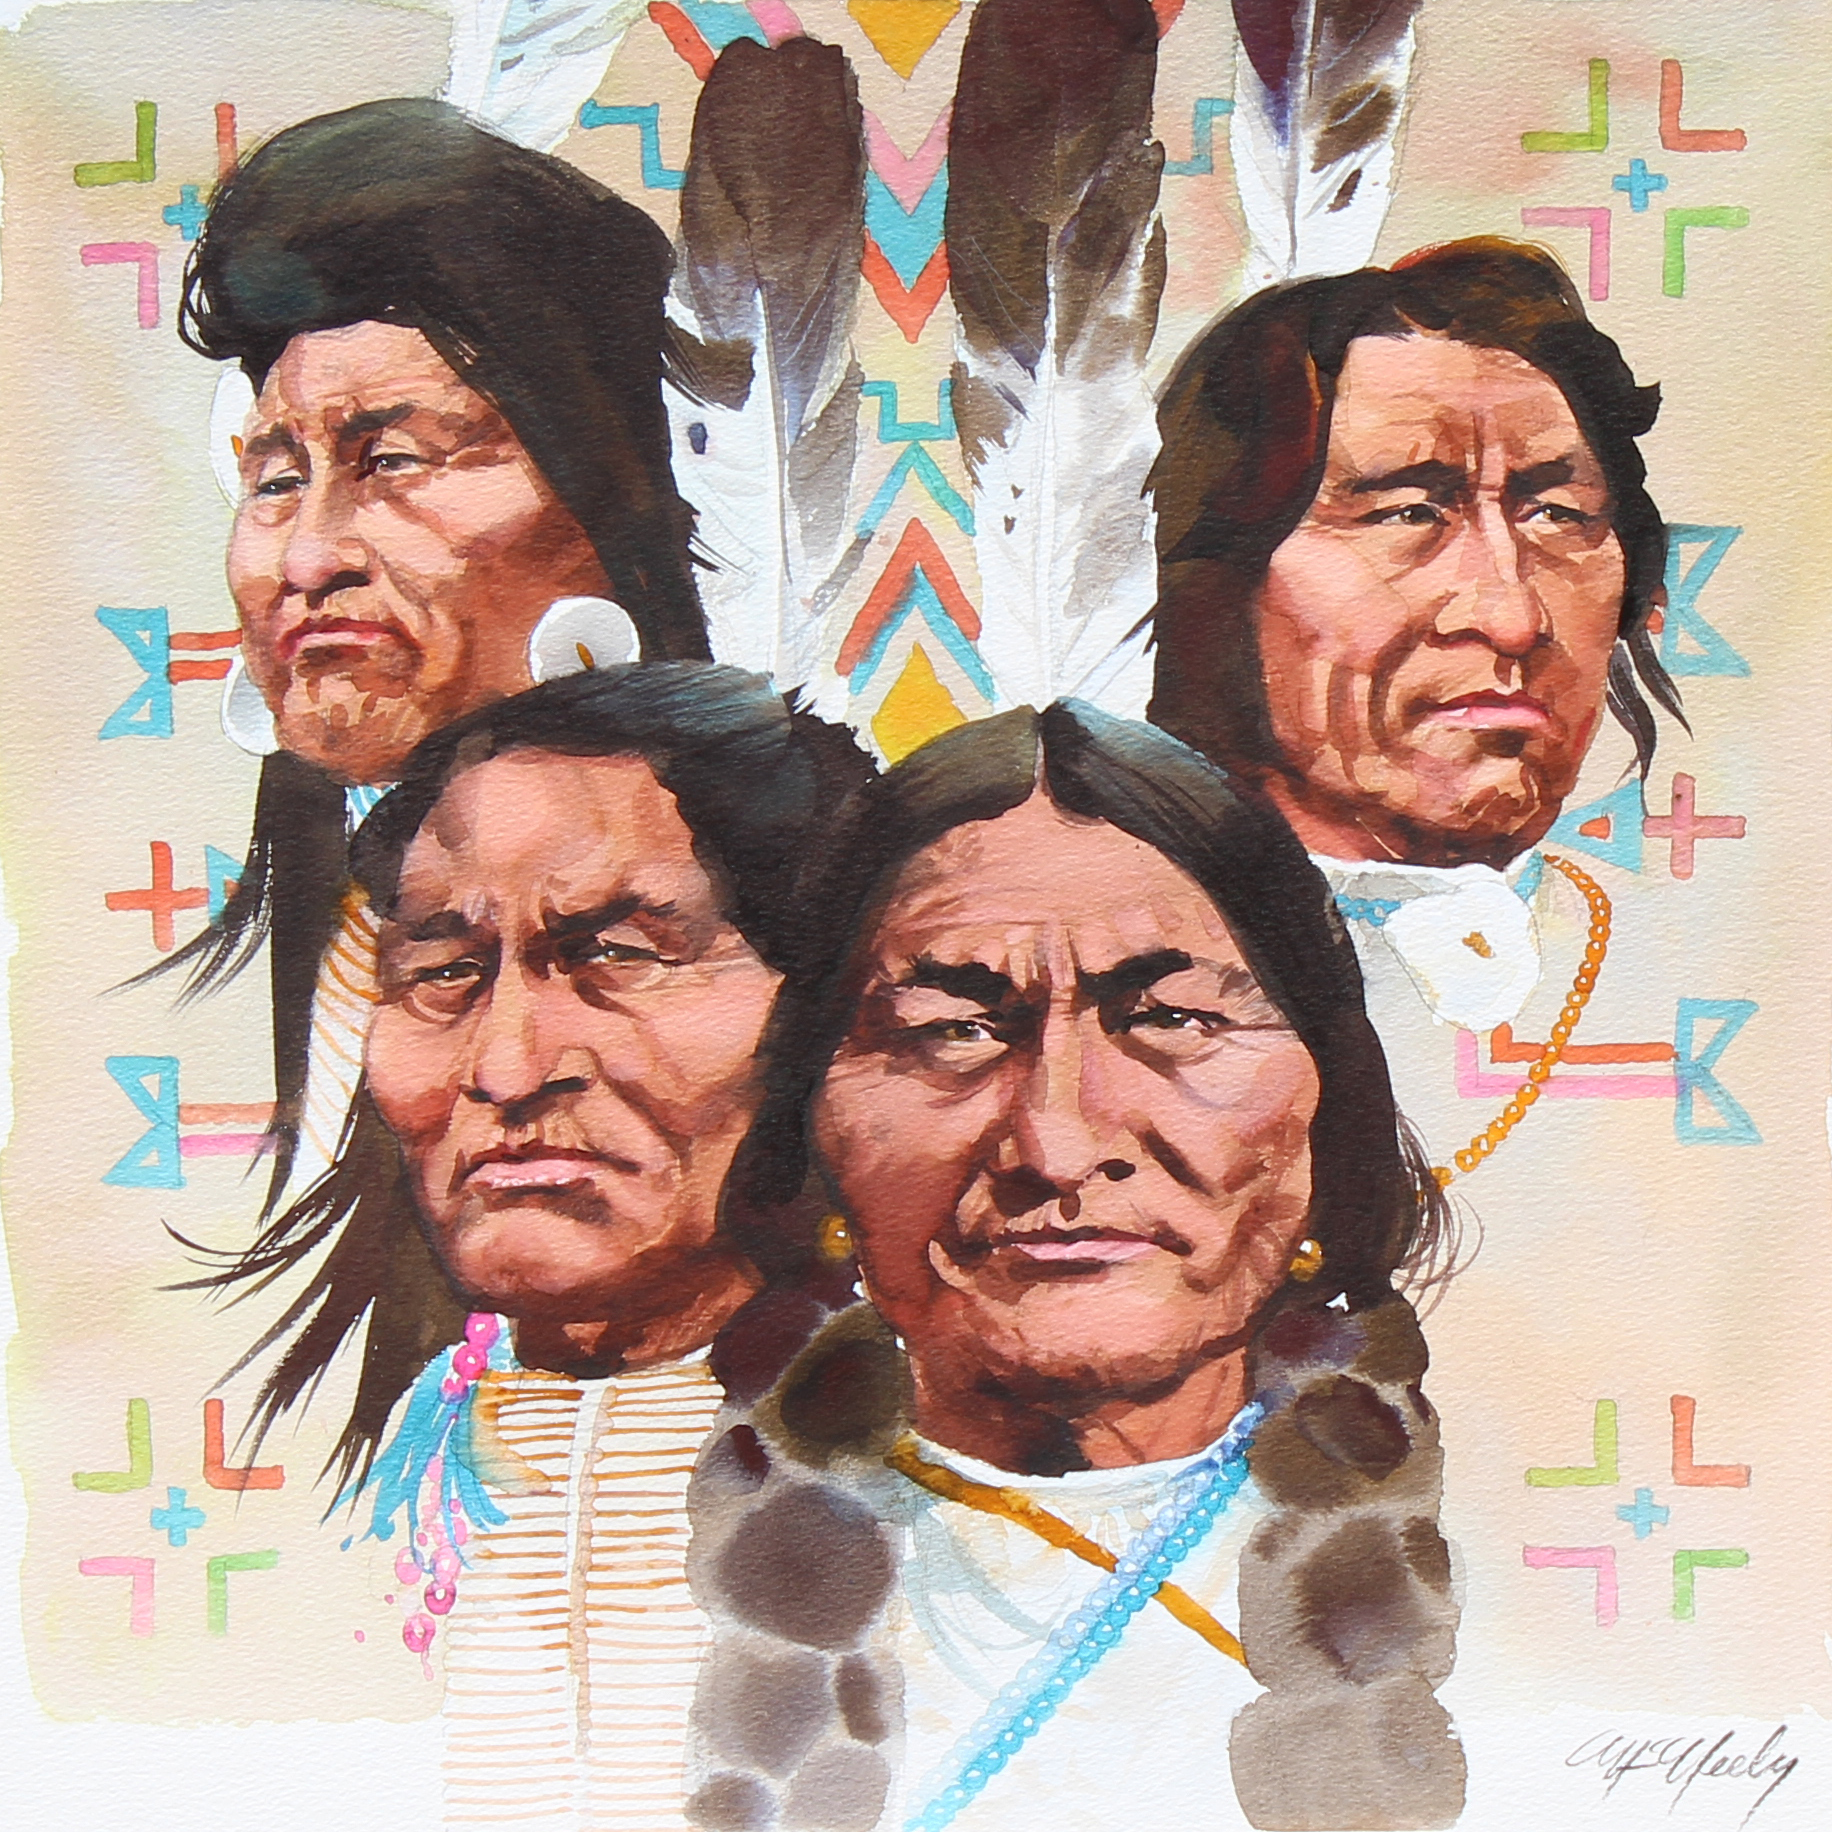 Tom McNeely (Canadian, B. 1935) "Great American Chiefs" Signed lower right. Original Watercolor